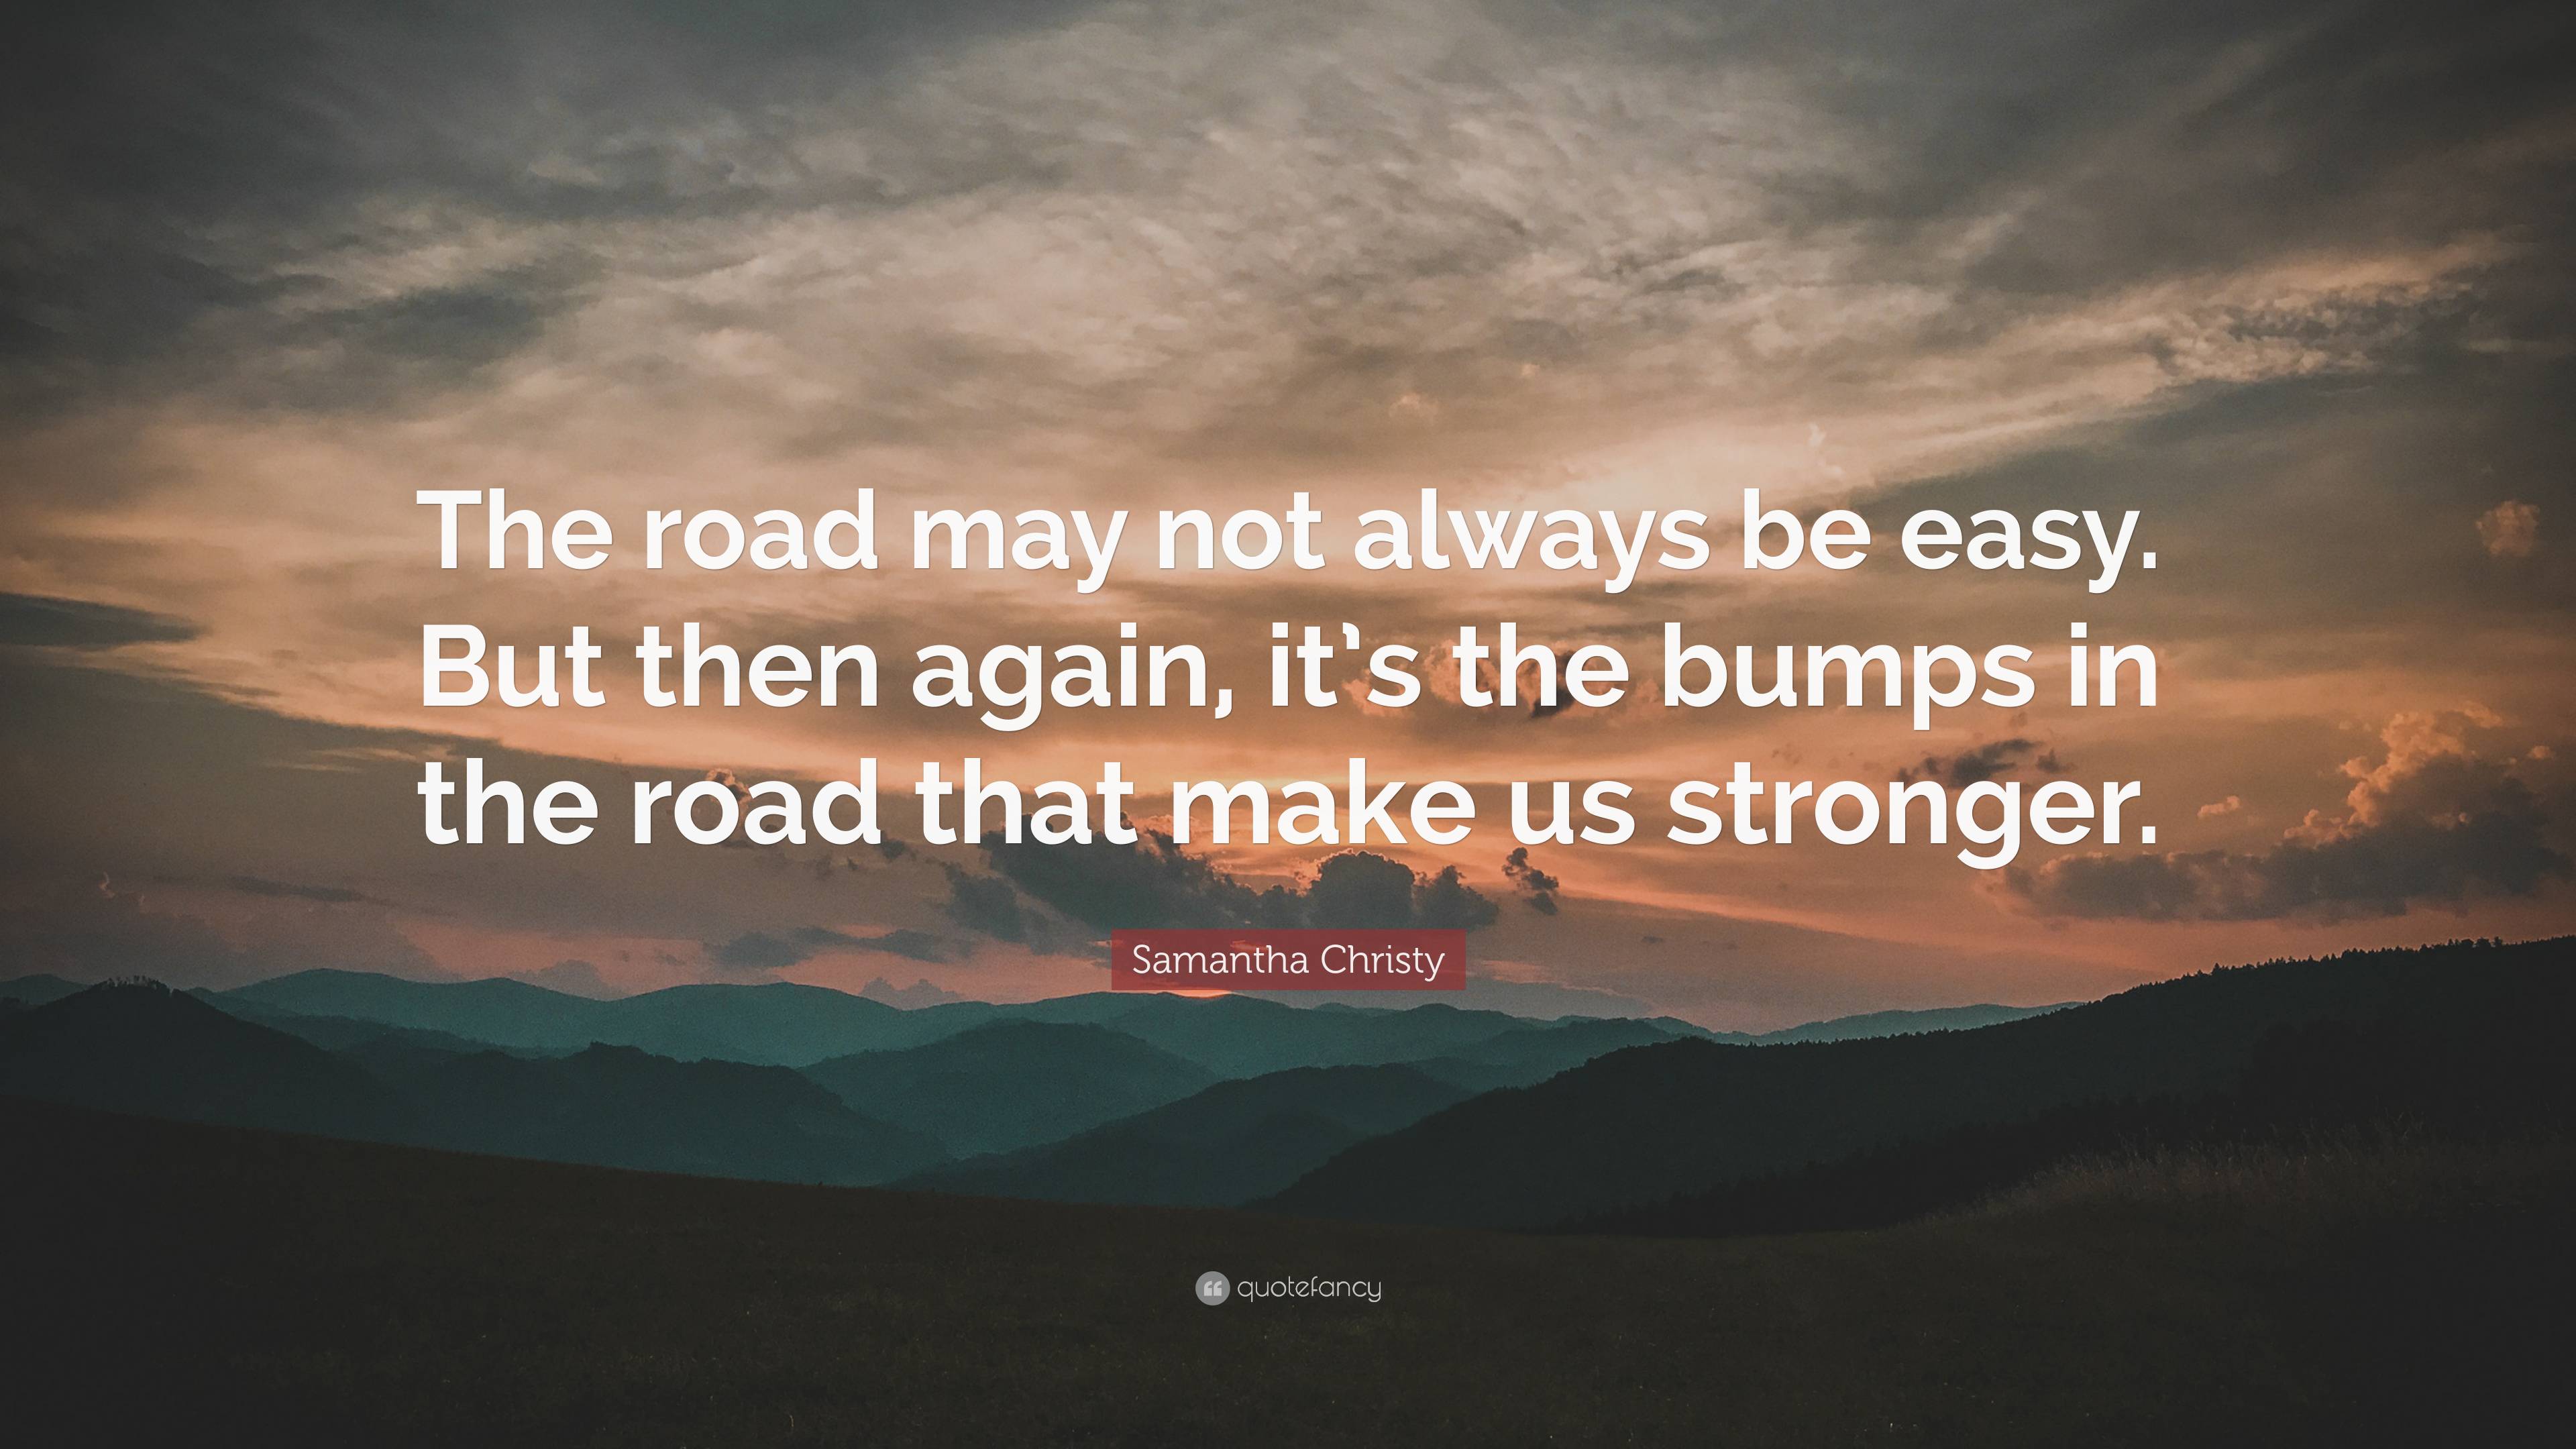 Samantha Christy Quote: “The road may not always be easy. But then ...